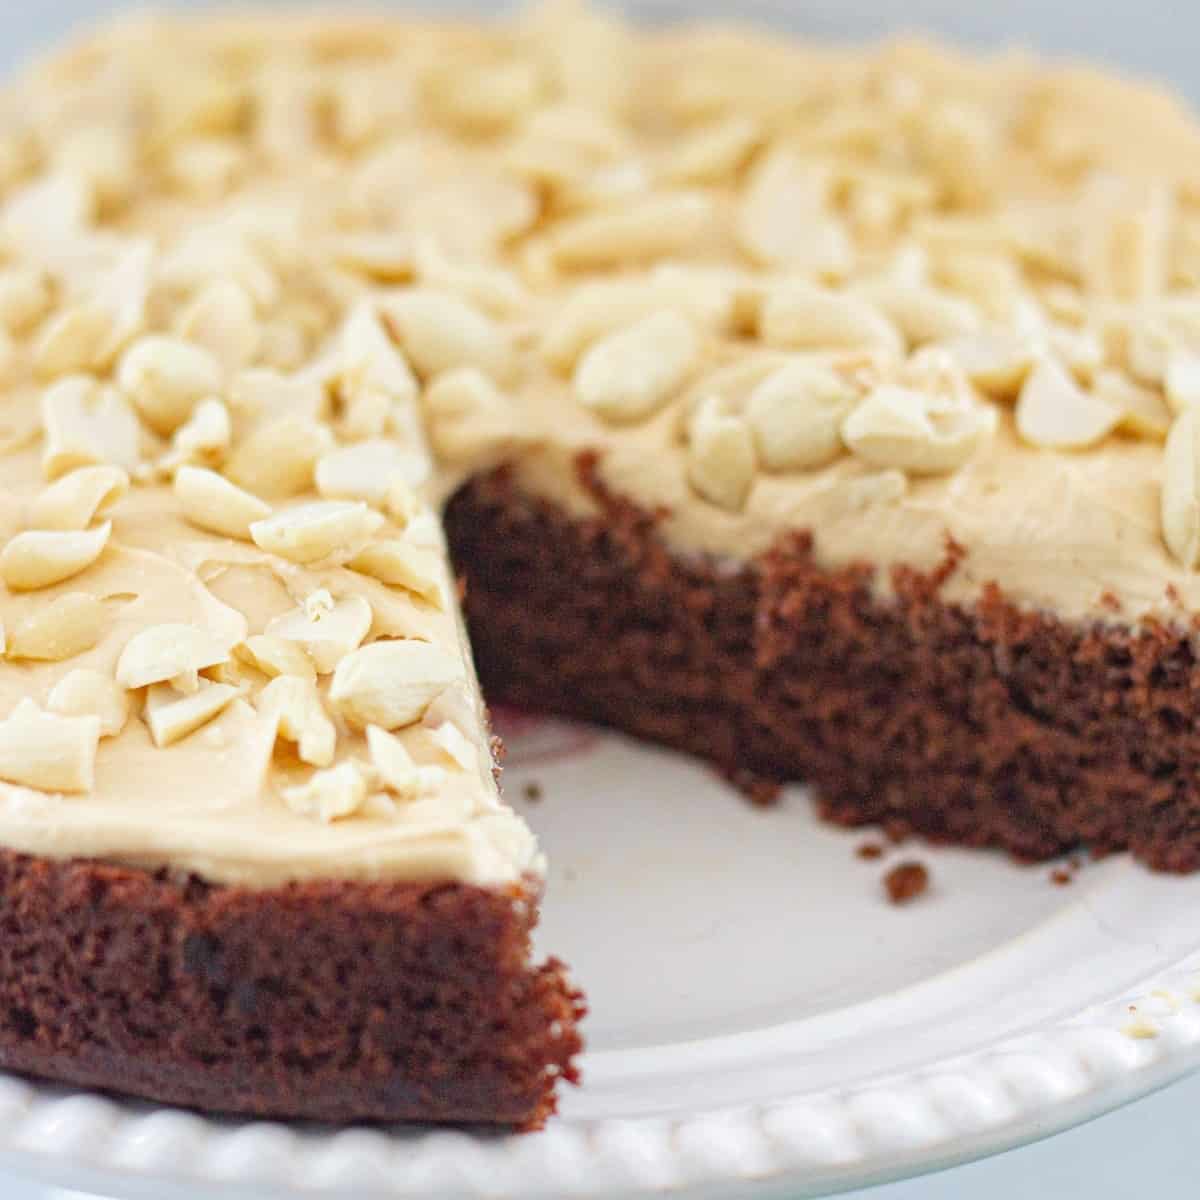 A vegan chocolate cake with nutty icing